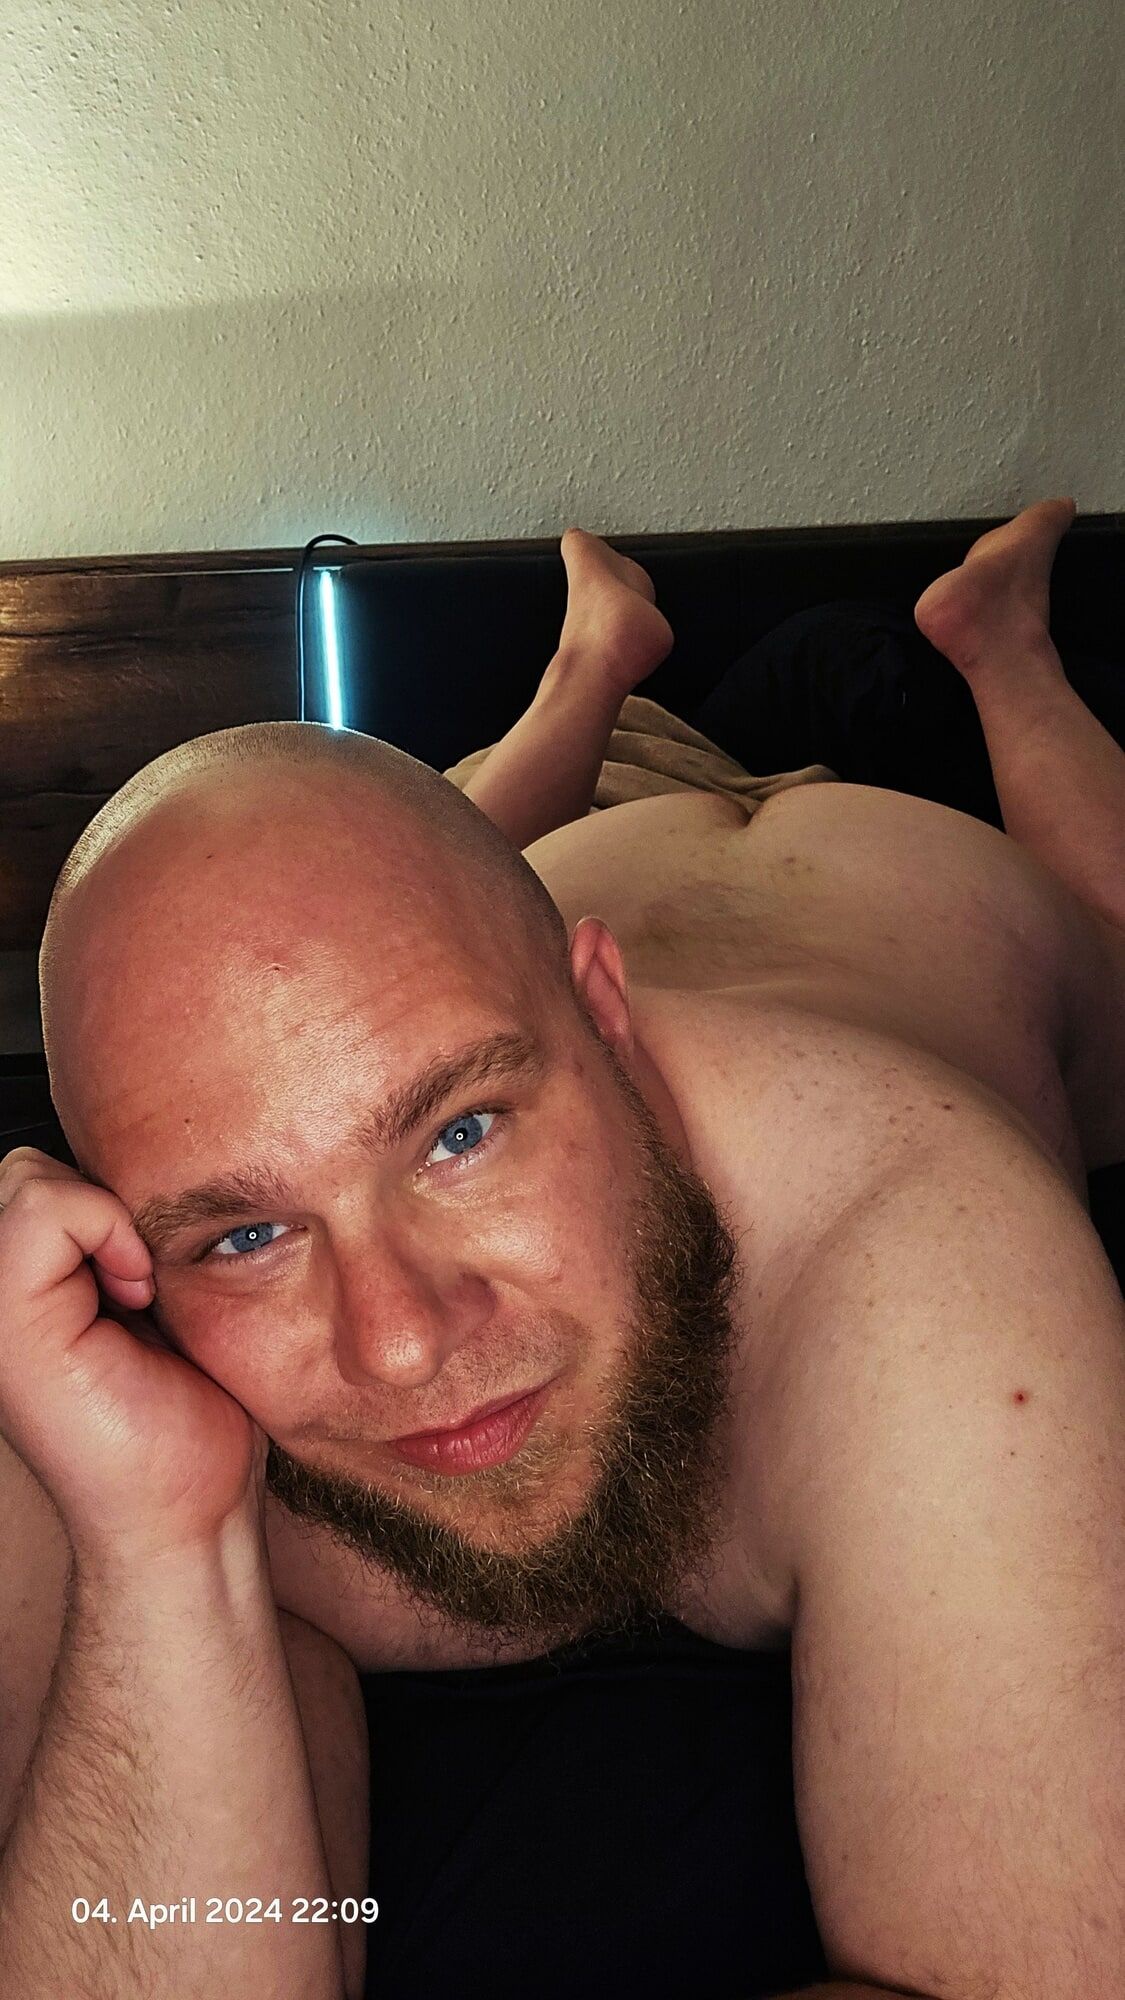 This is what a really fat hairy gay ass looks like #23